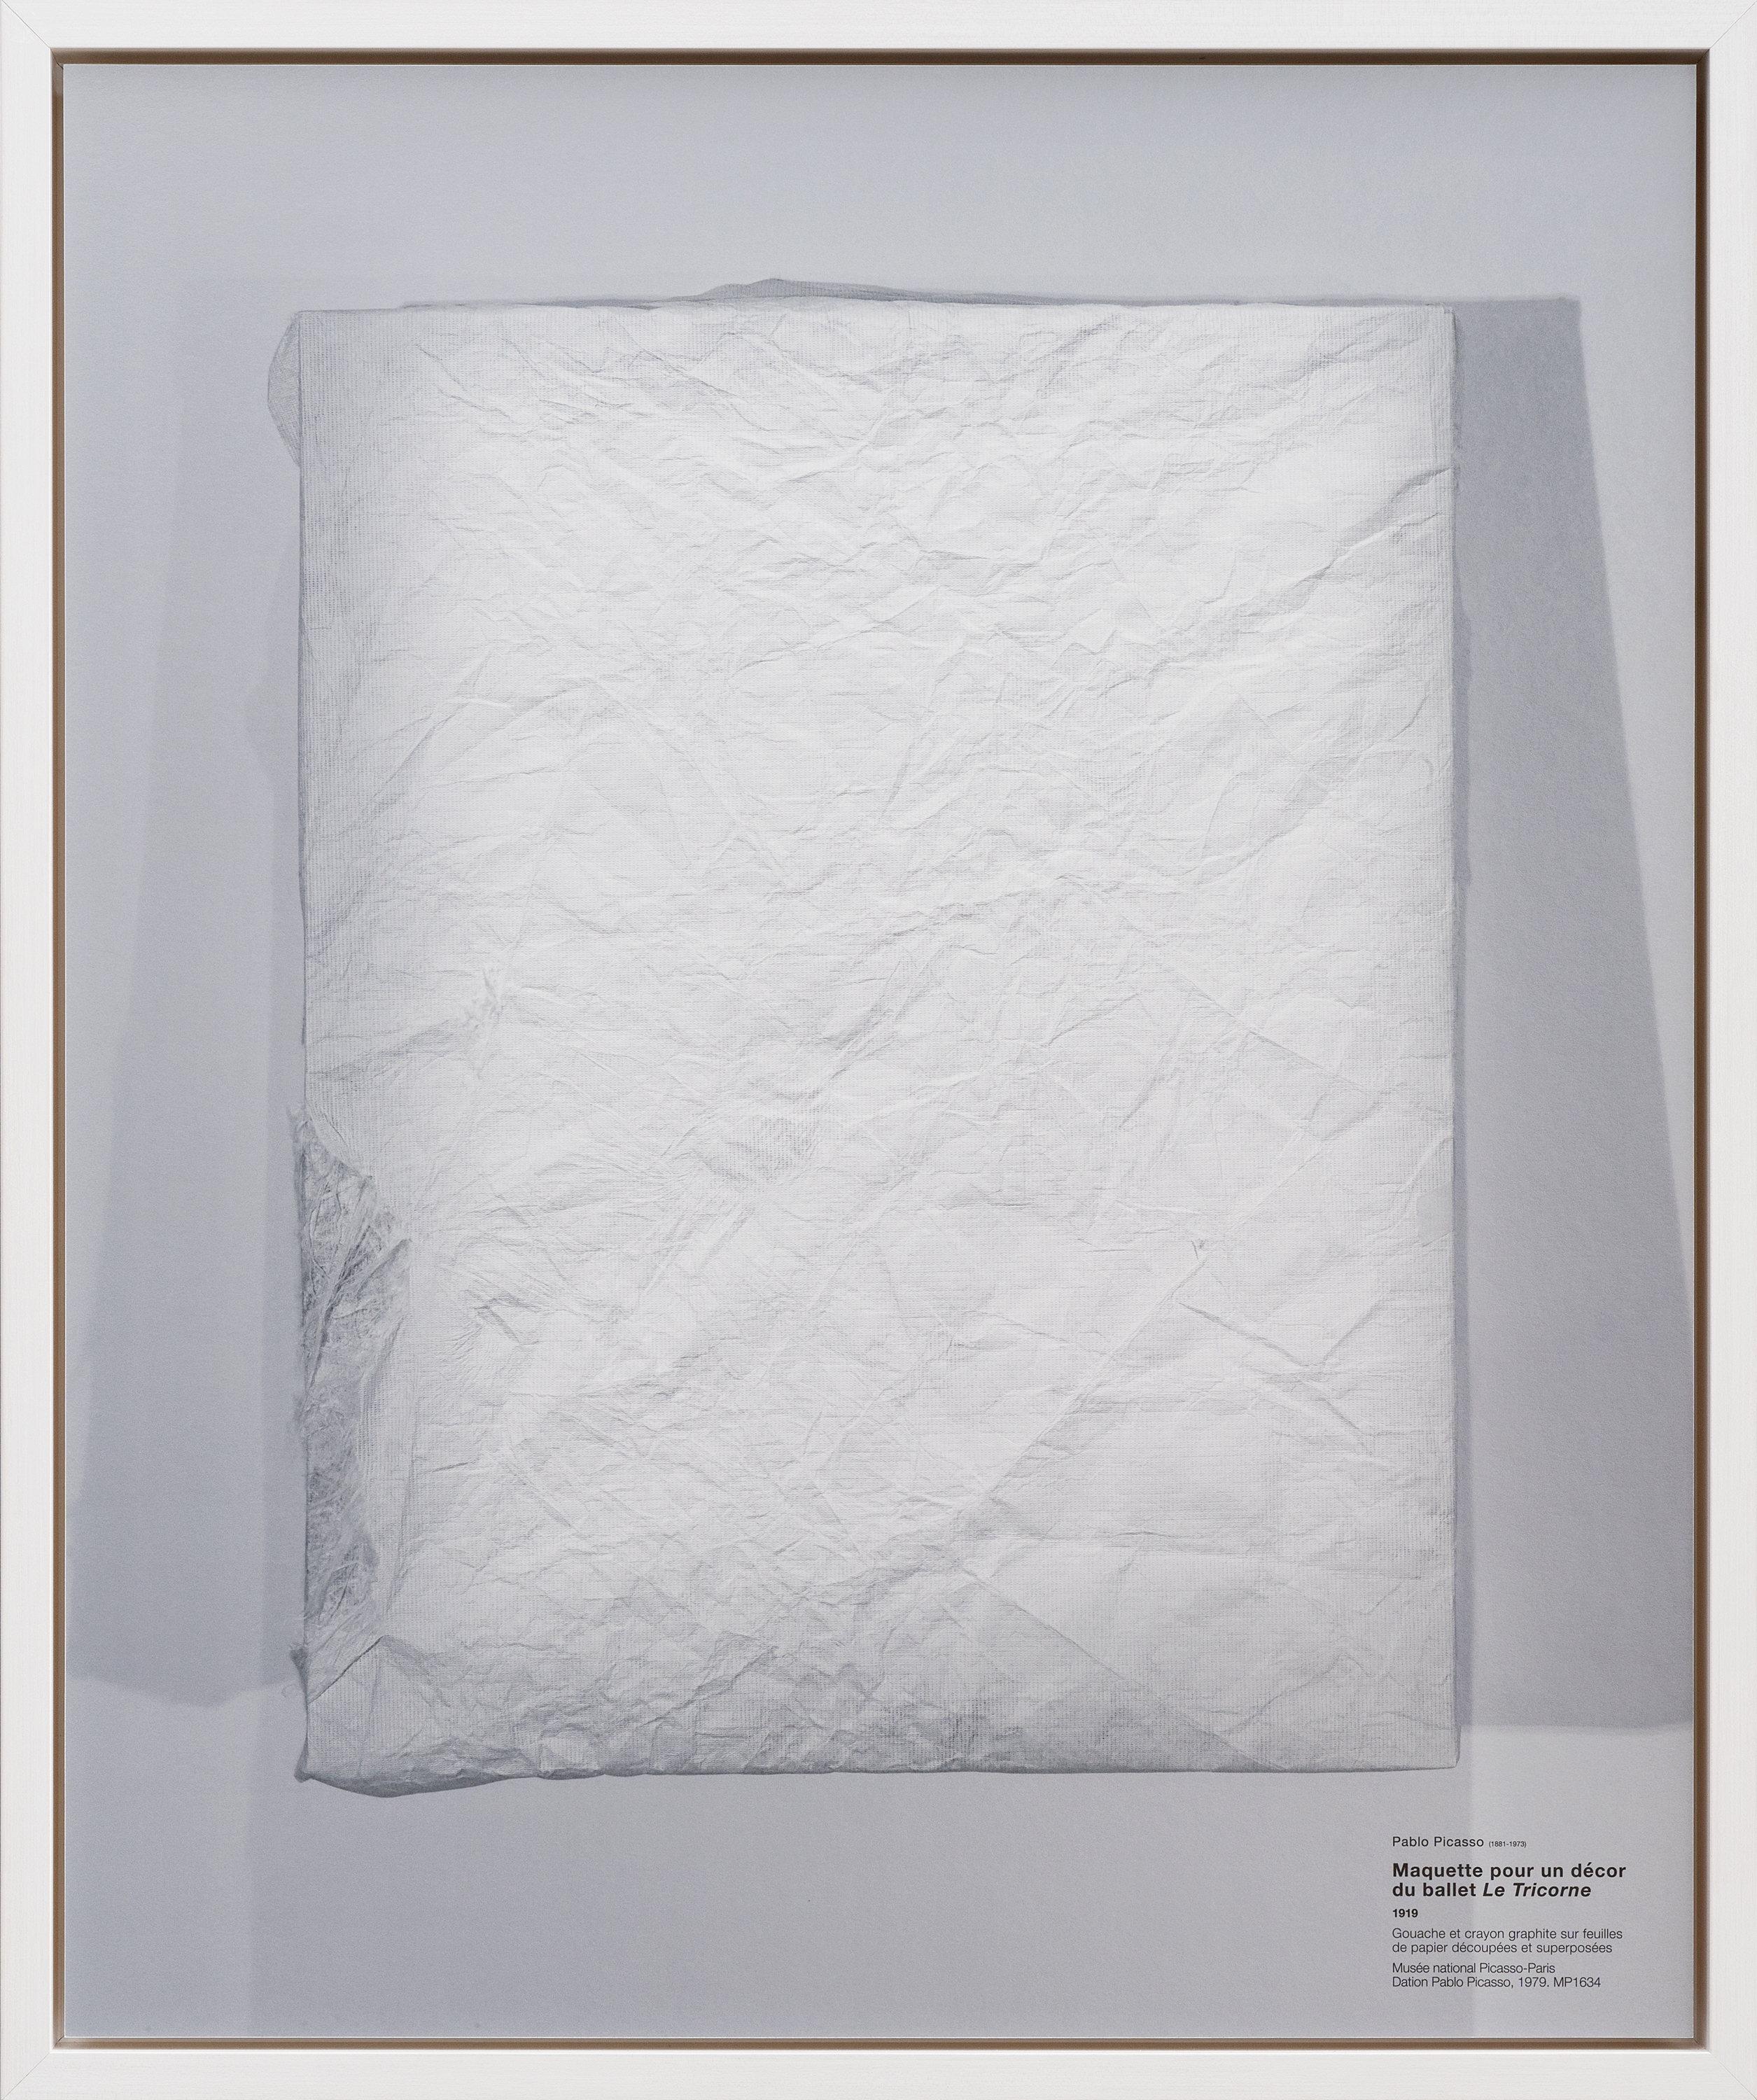 Color photograph of an installed artwork covered with white paper framed in white